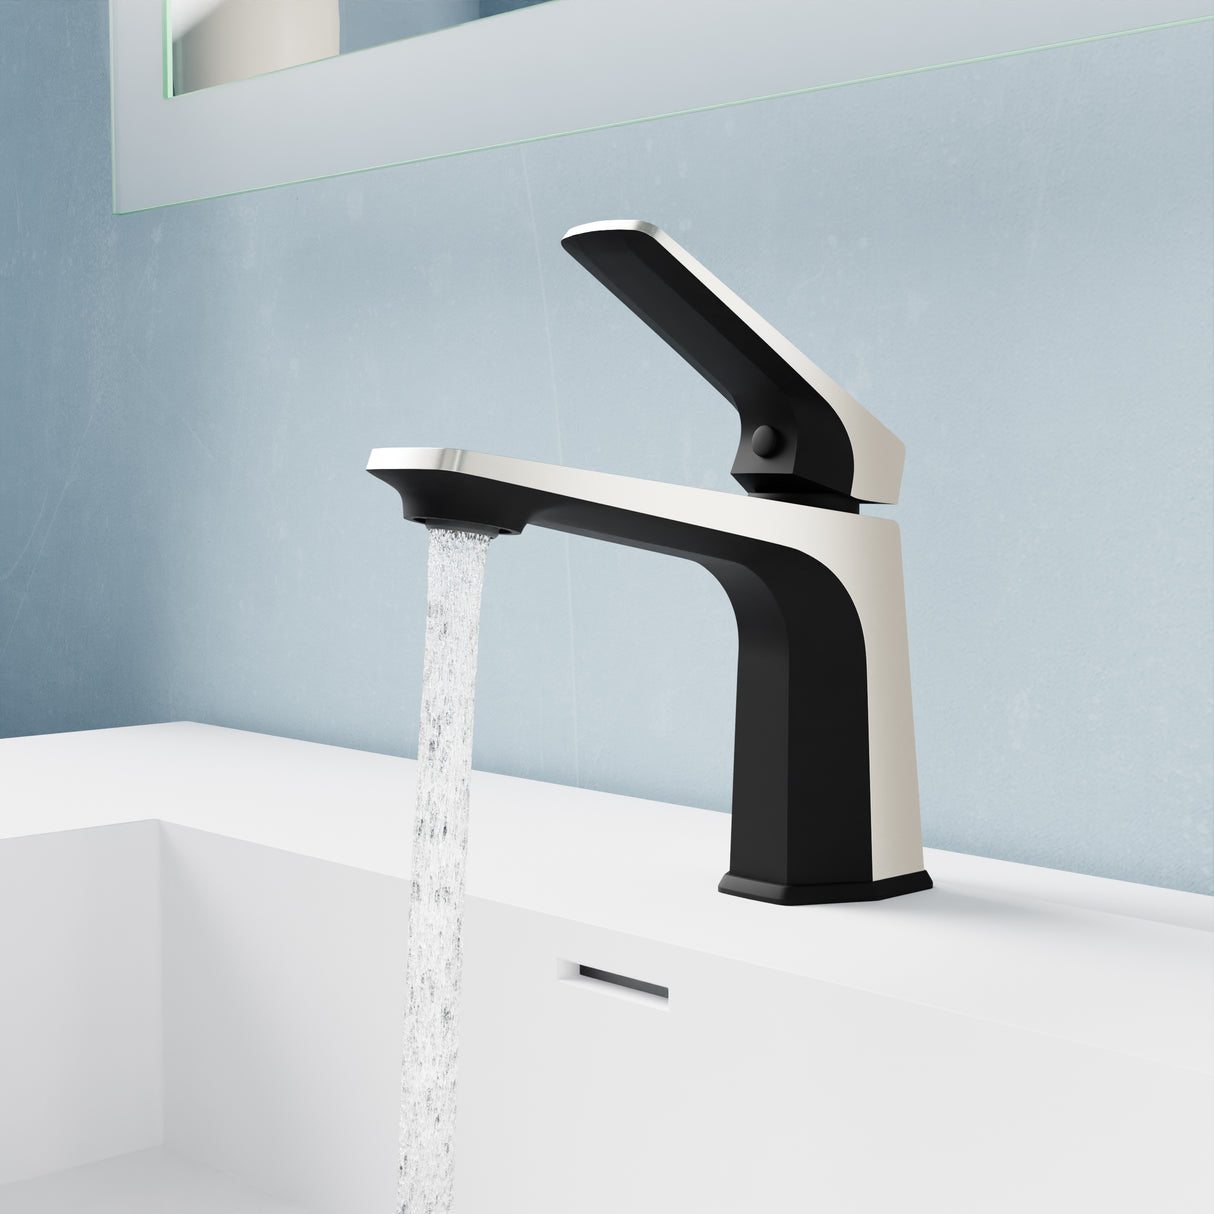 ANZZI L-AZ903MB-BN Single Handle Single Hole Bathroom Faucet With Pop-up Drain in Matte Black & Brushed Nickel